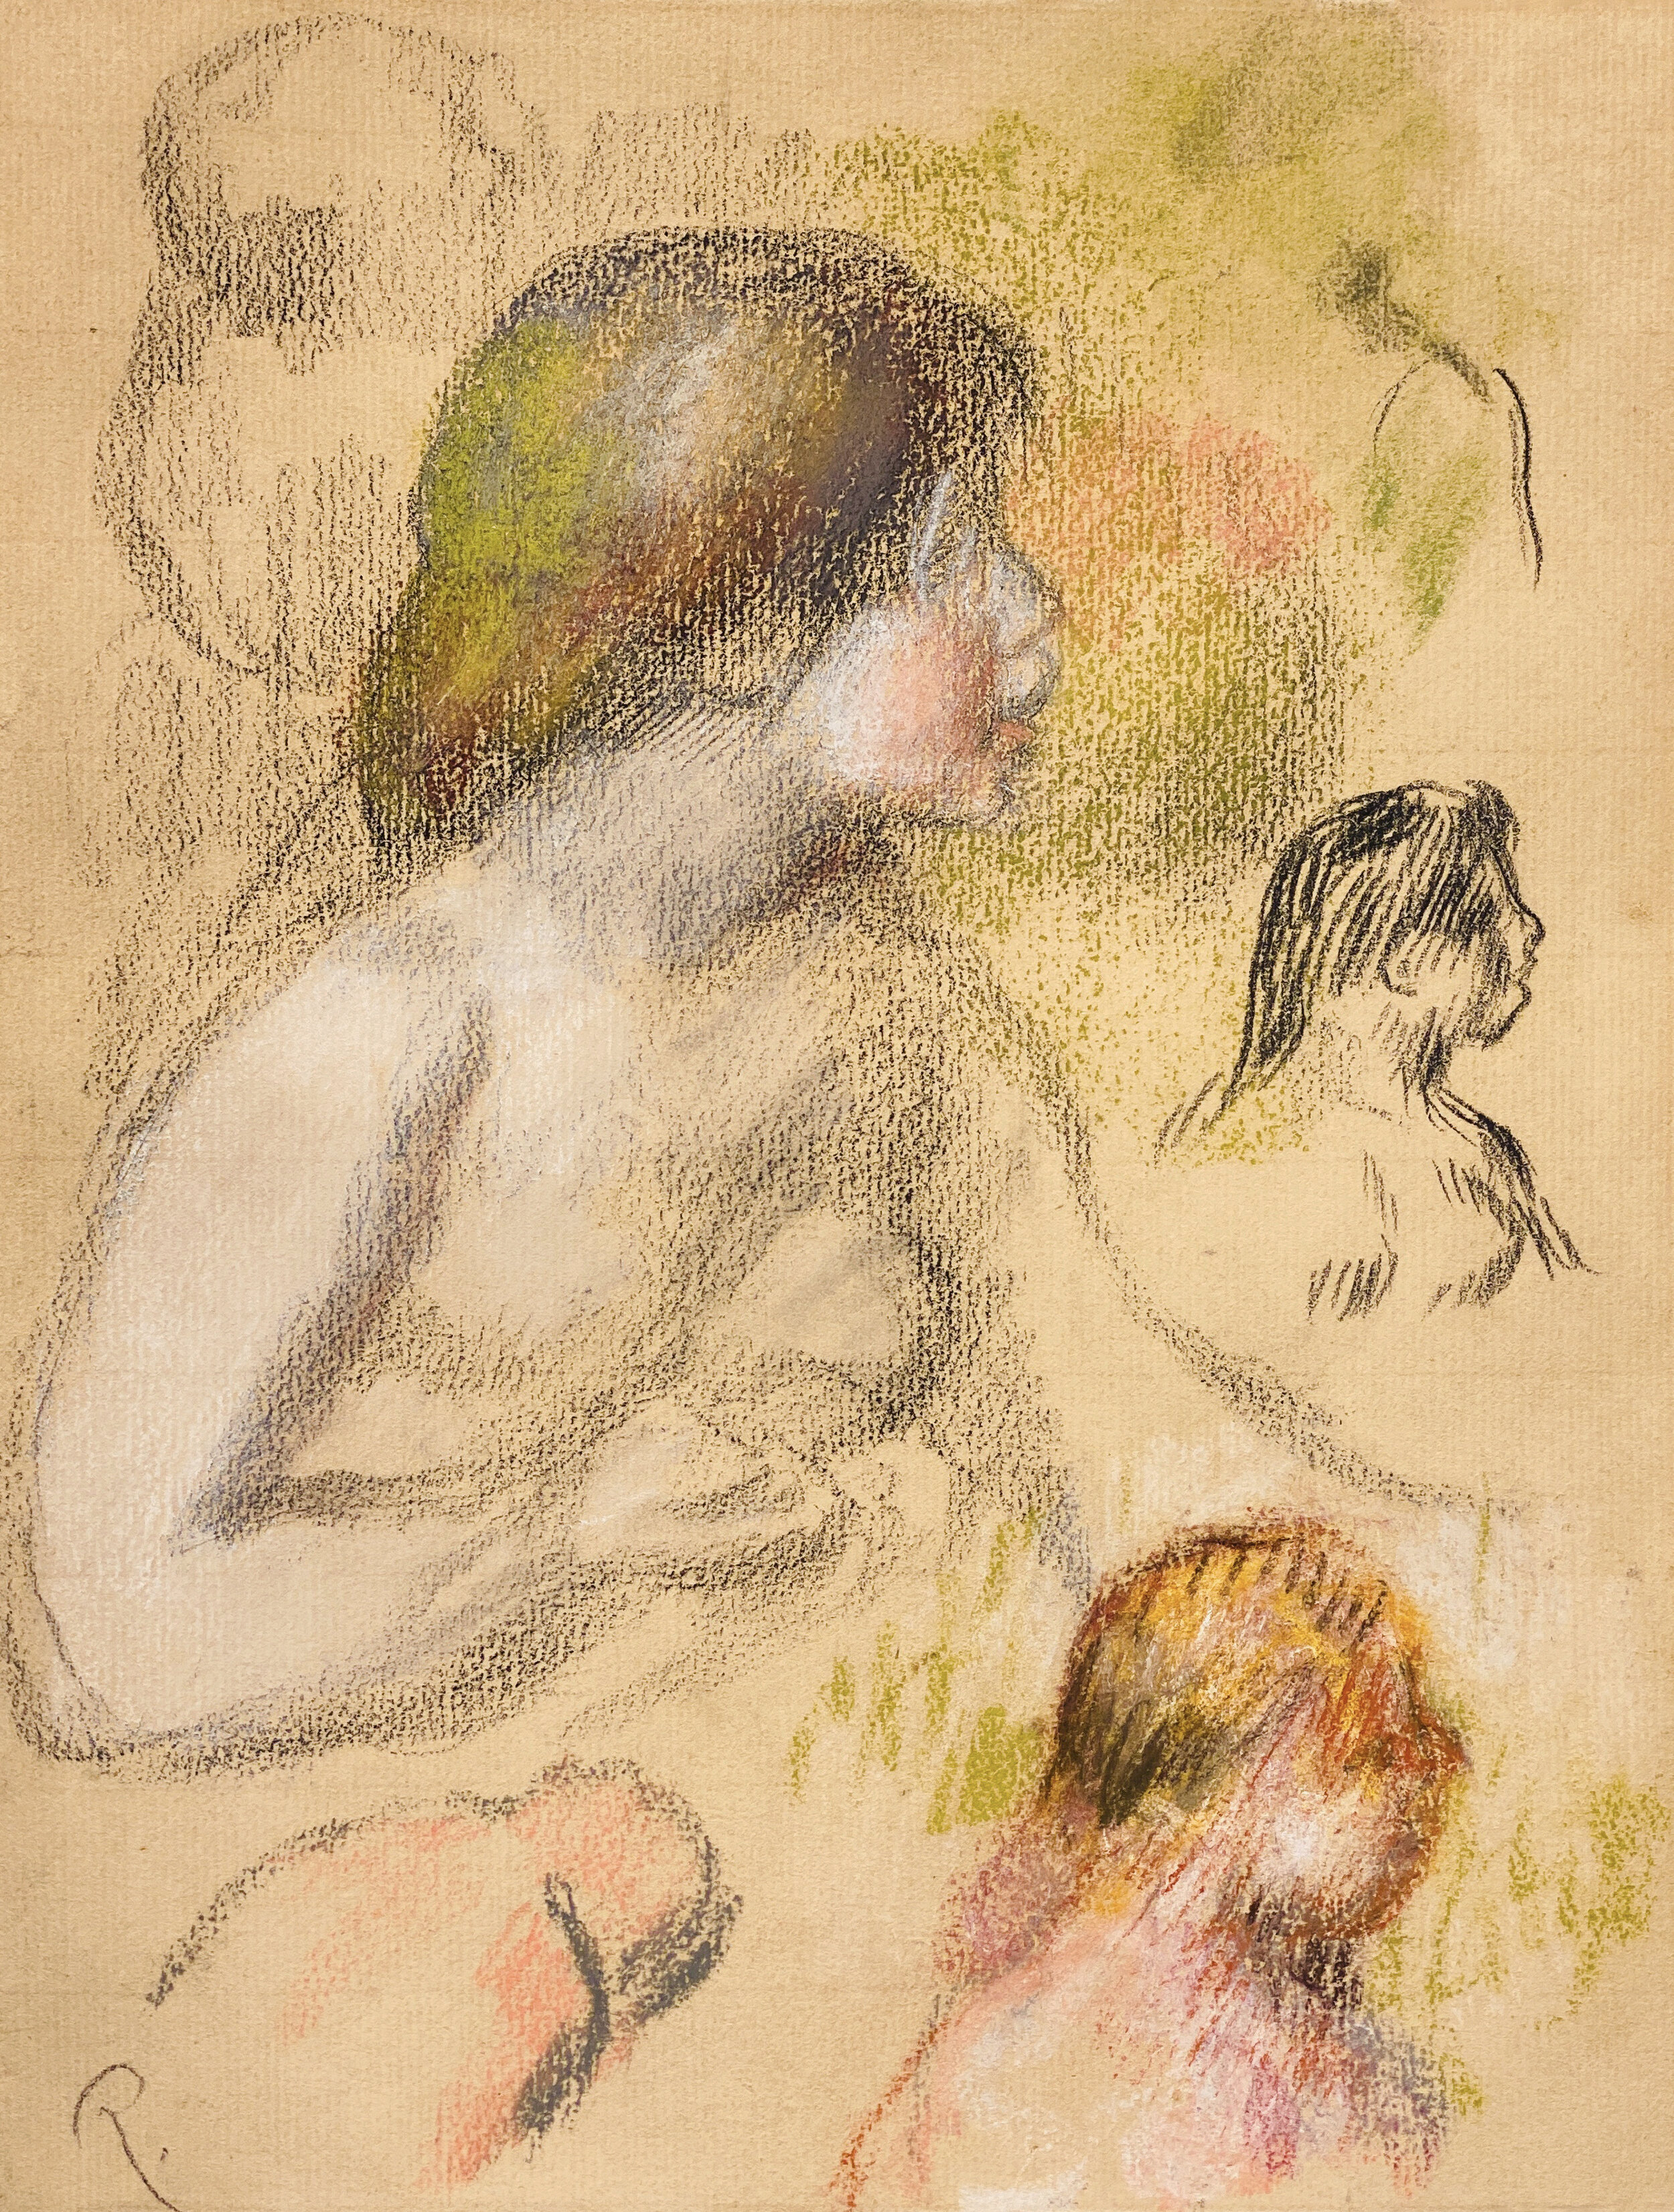   PIERRE-AUGUSTE RENOIR    French, 1841–1919   Etudes de Femme Nue   Signed with initial R. Pastel and colored chalks on paper 12¼ x 9¾ inches (30.8 x 25.1 cm) 